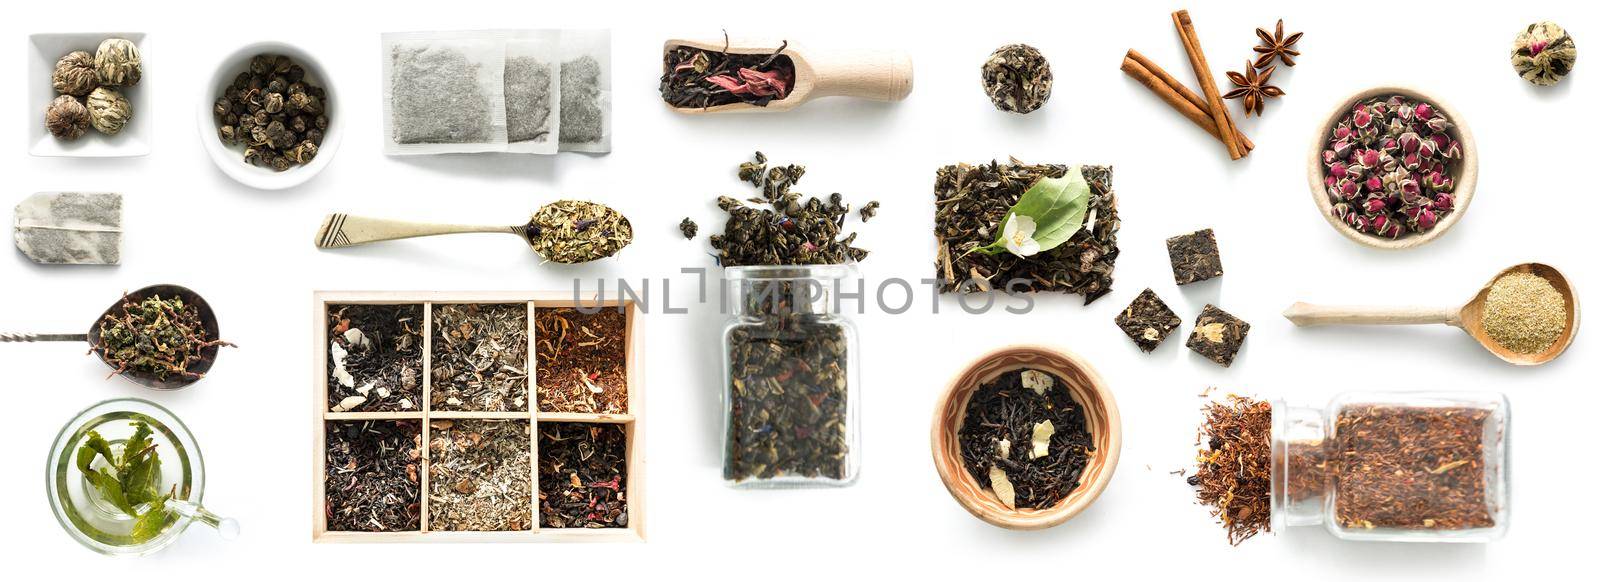 Various kinds of tea, spoons and rustic dishware, brewed green tea, cinnamon, topview. isolated on a white background